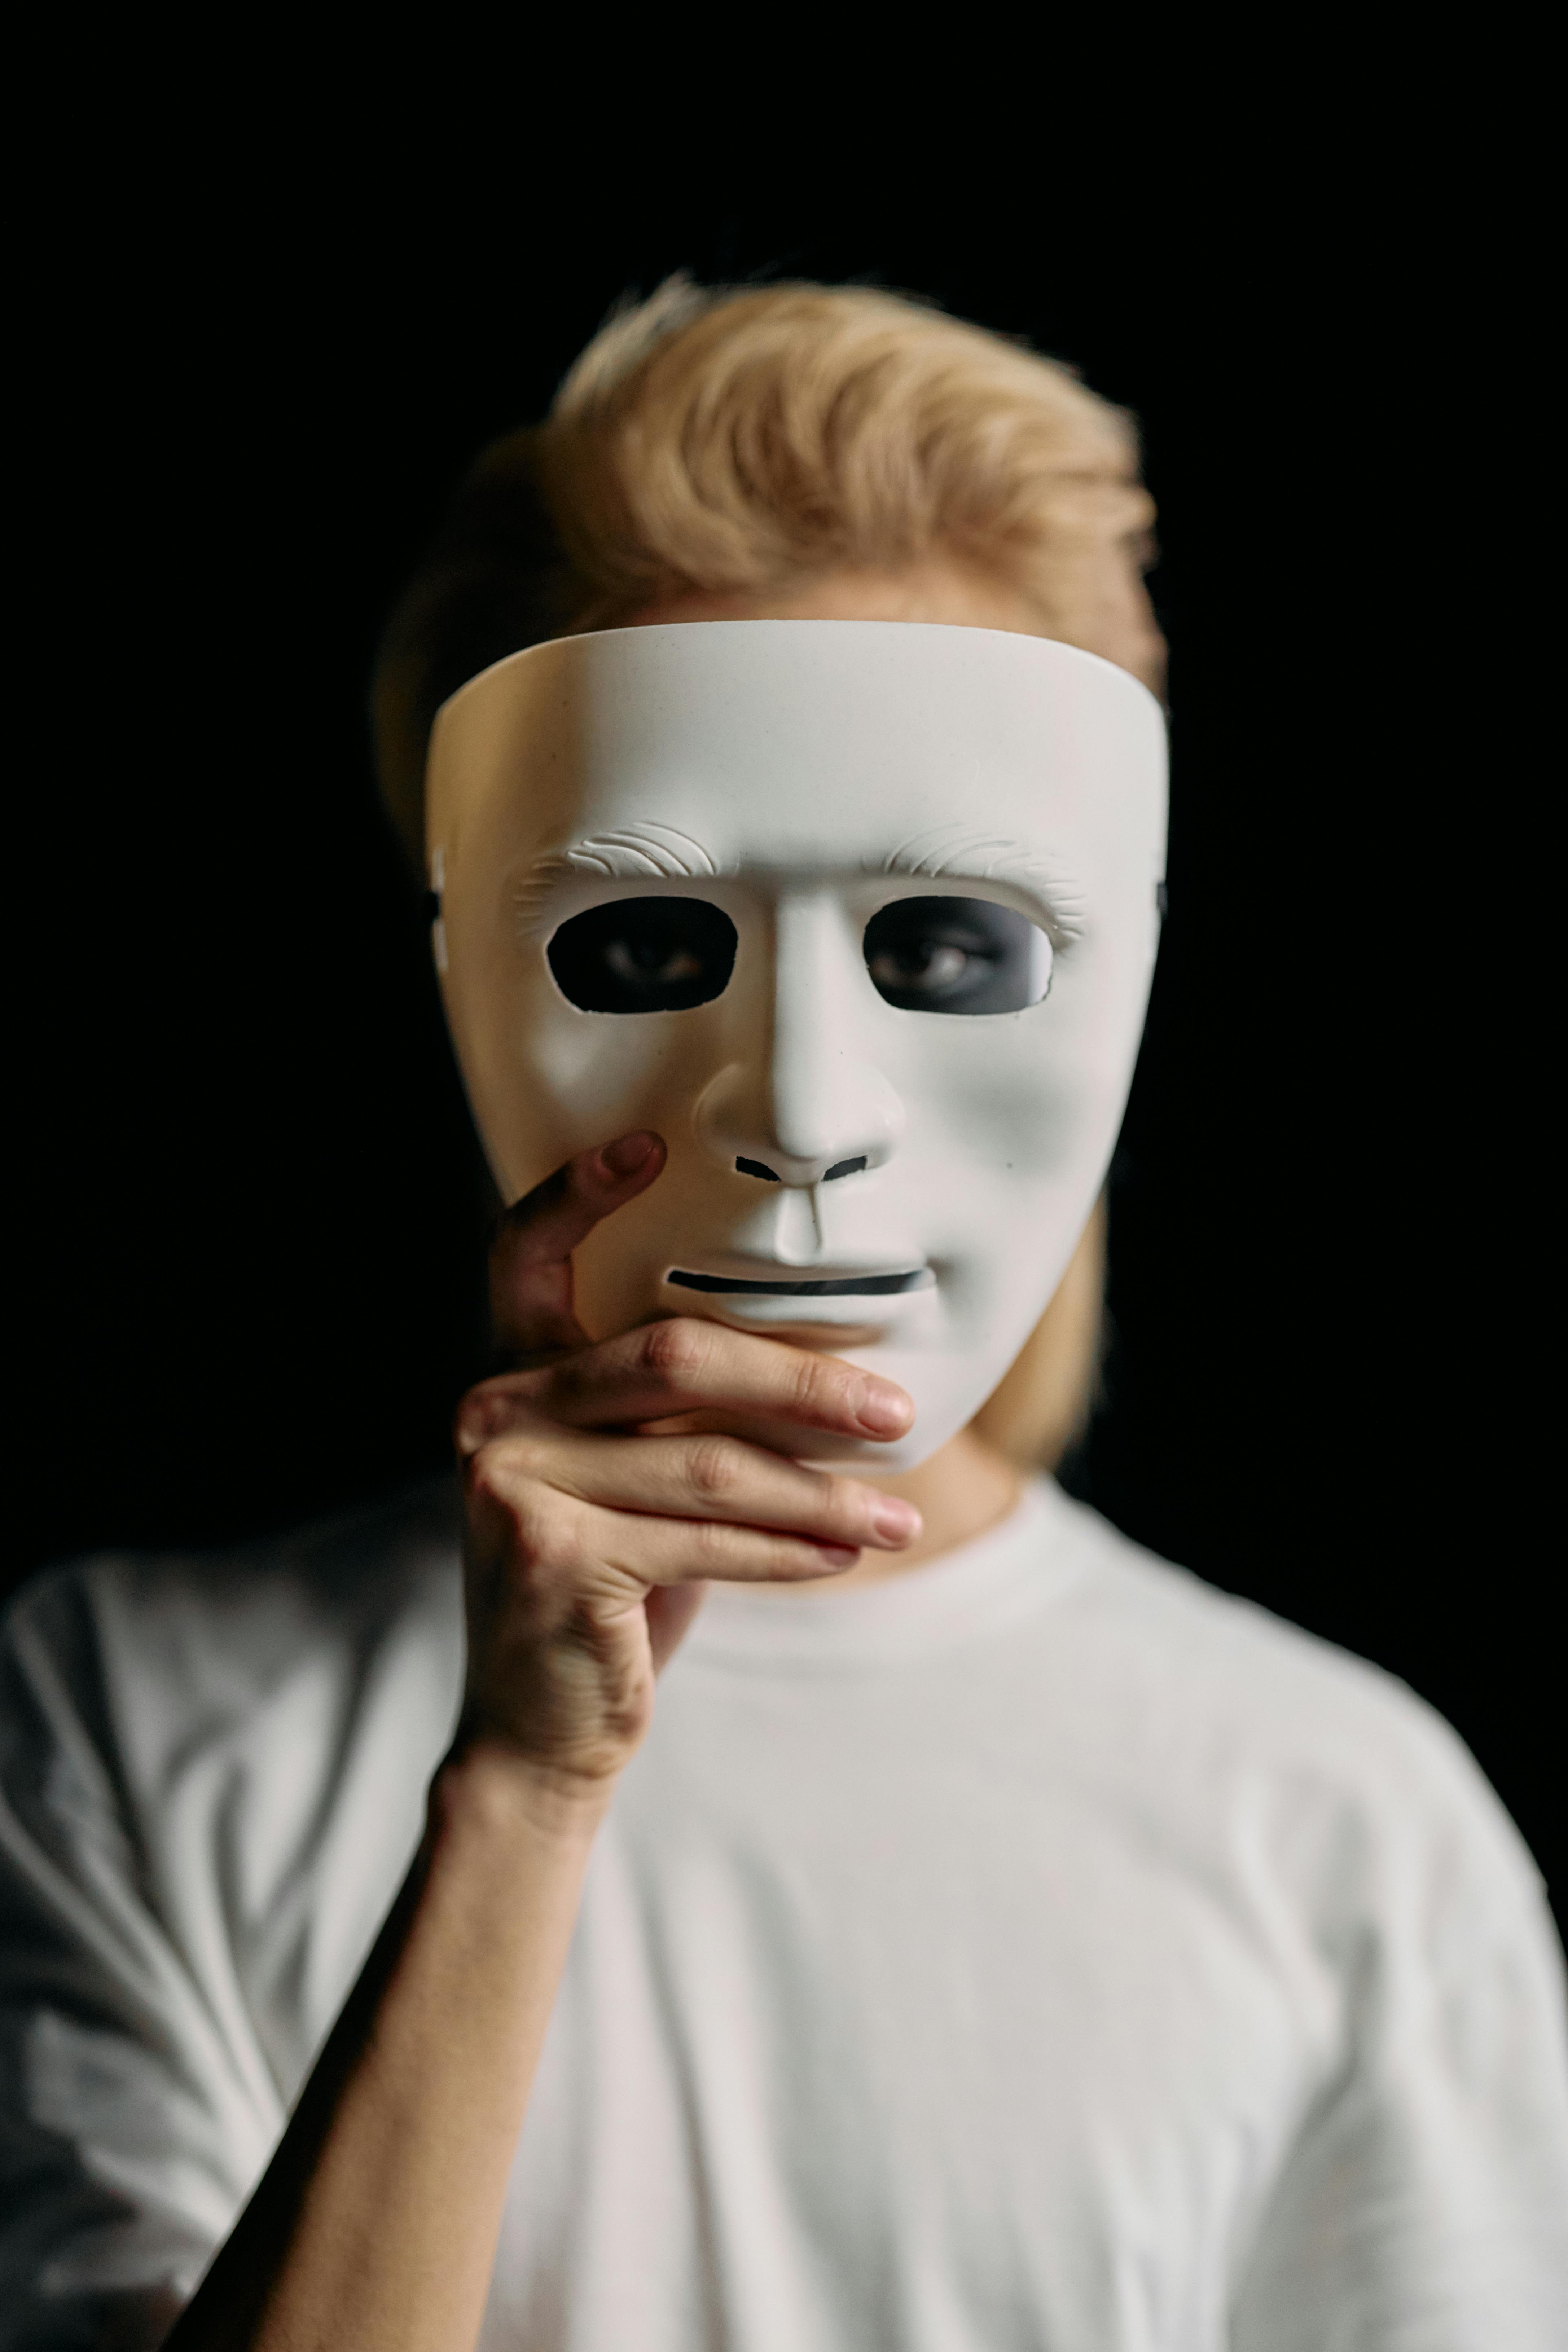 of Man Looking a Mask · Free Stock Photo